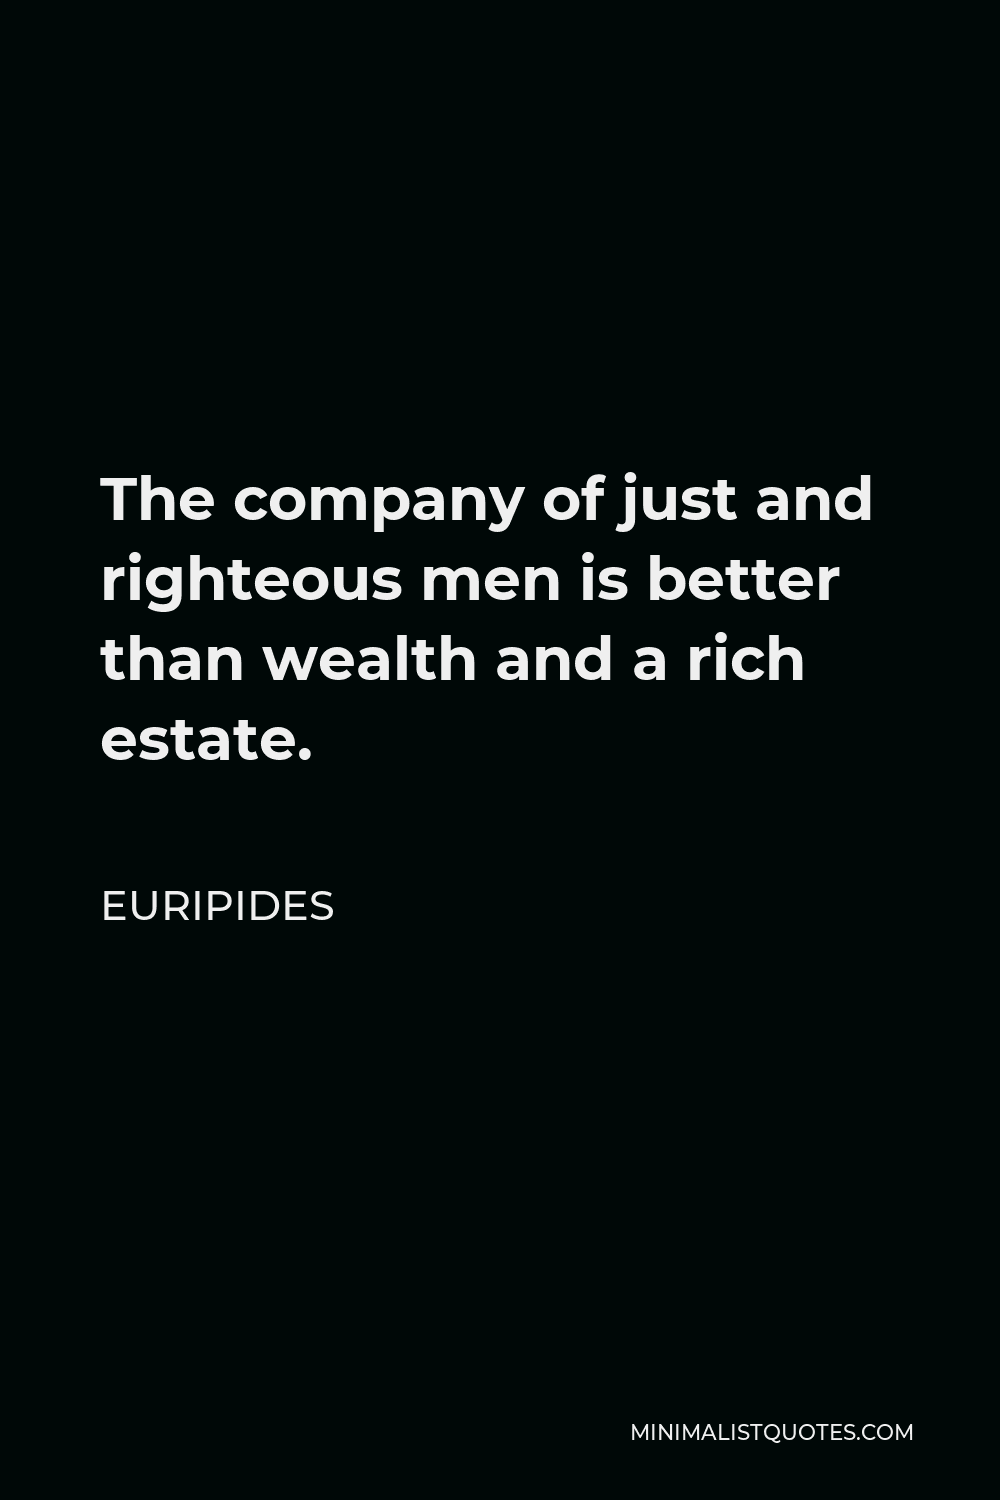 Euripides Quote - The company of just and righteous men is better than wealth and a rich estate.